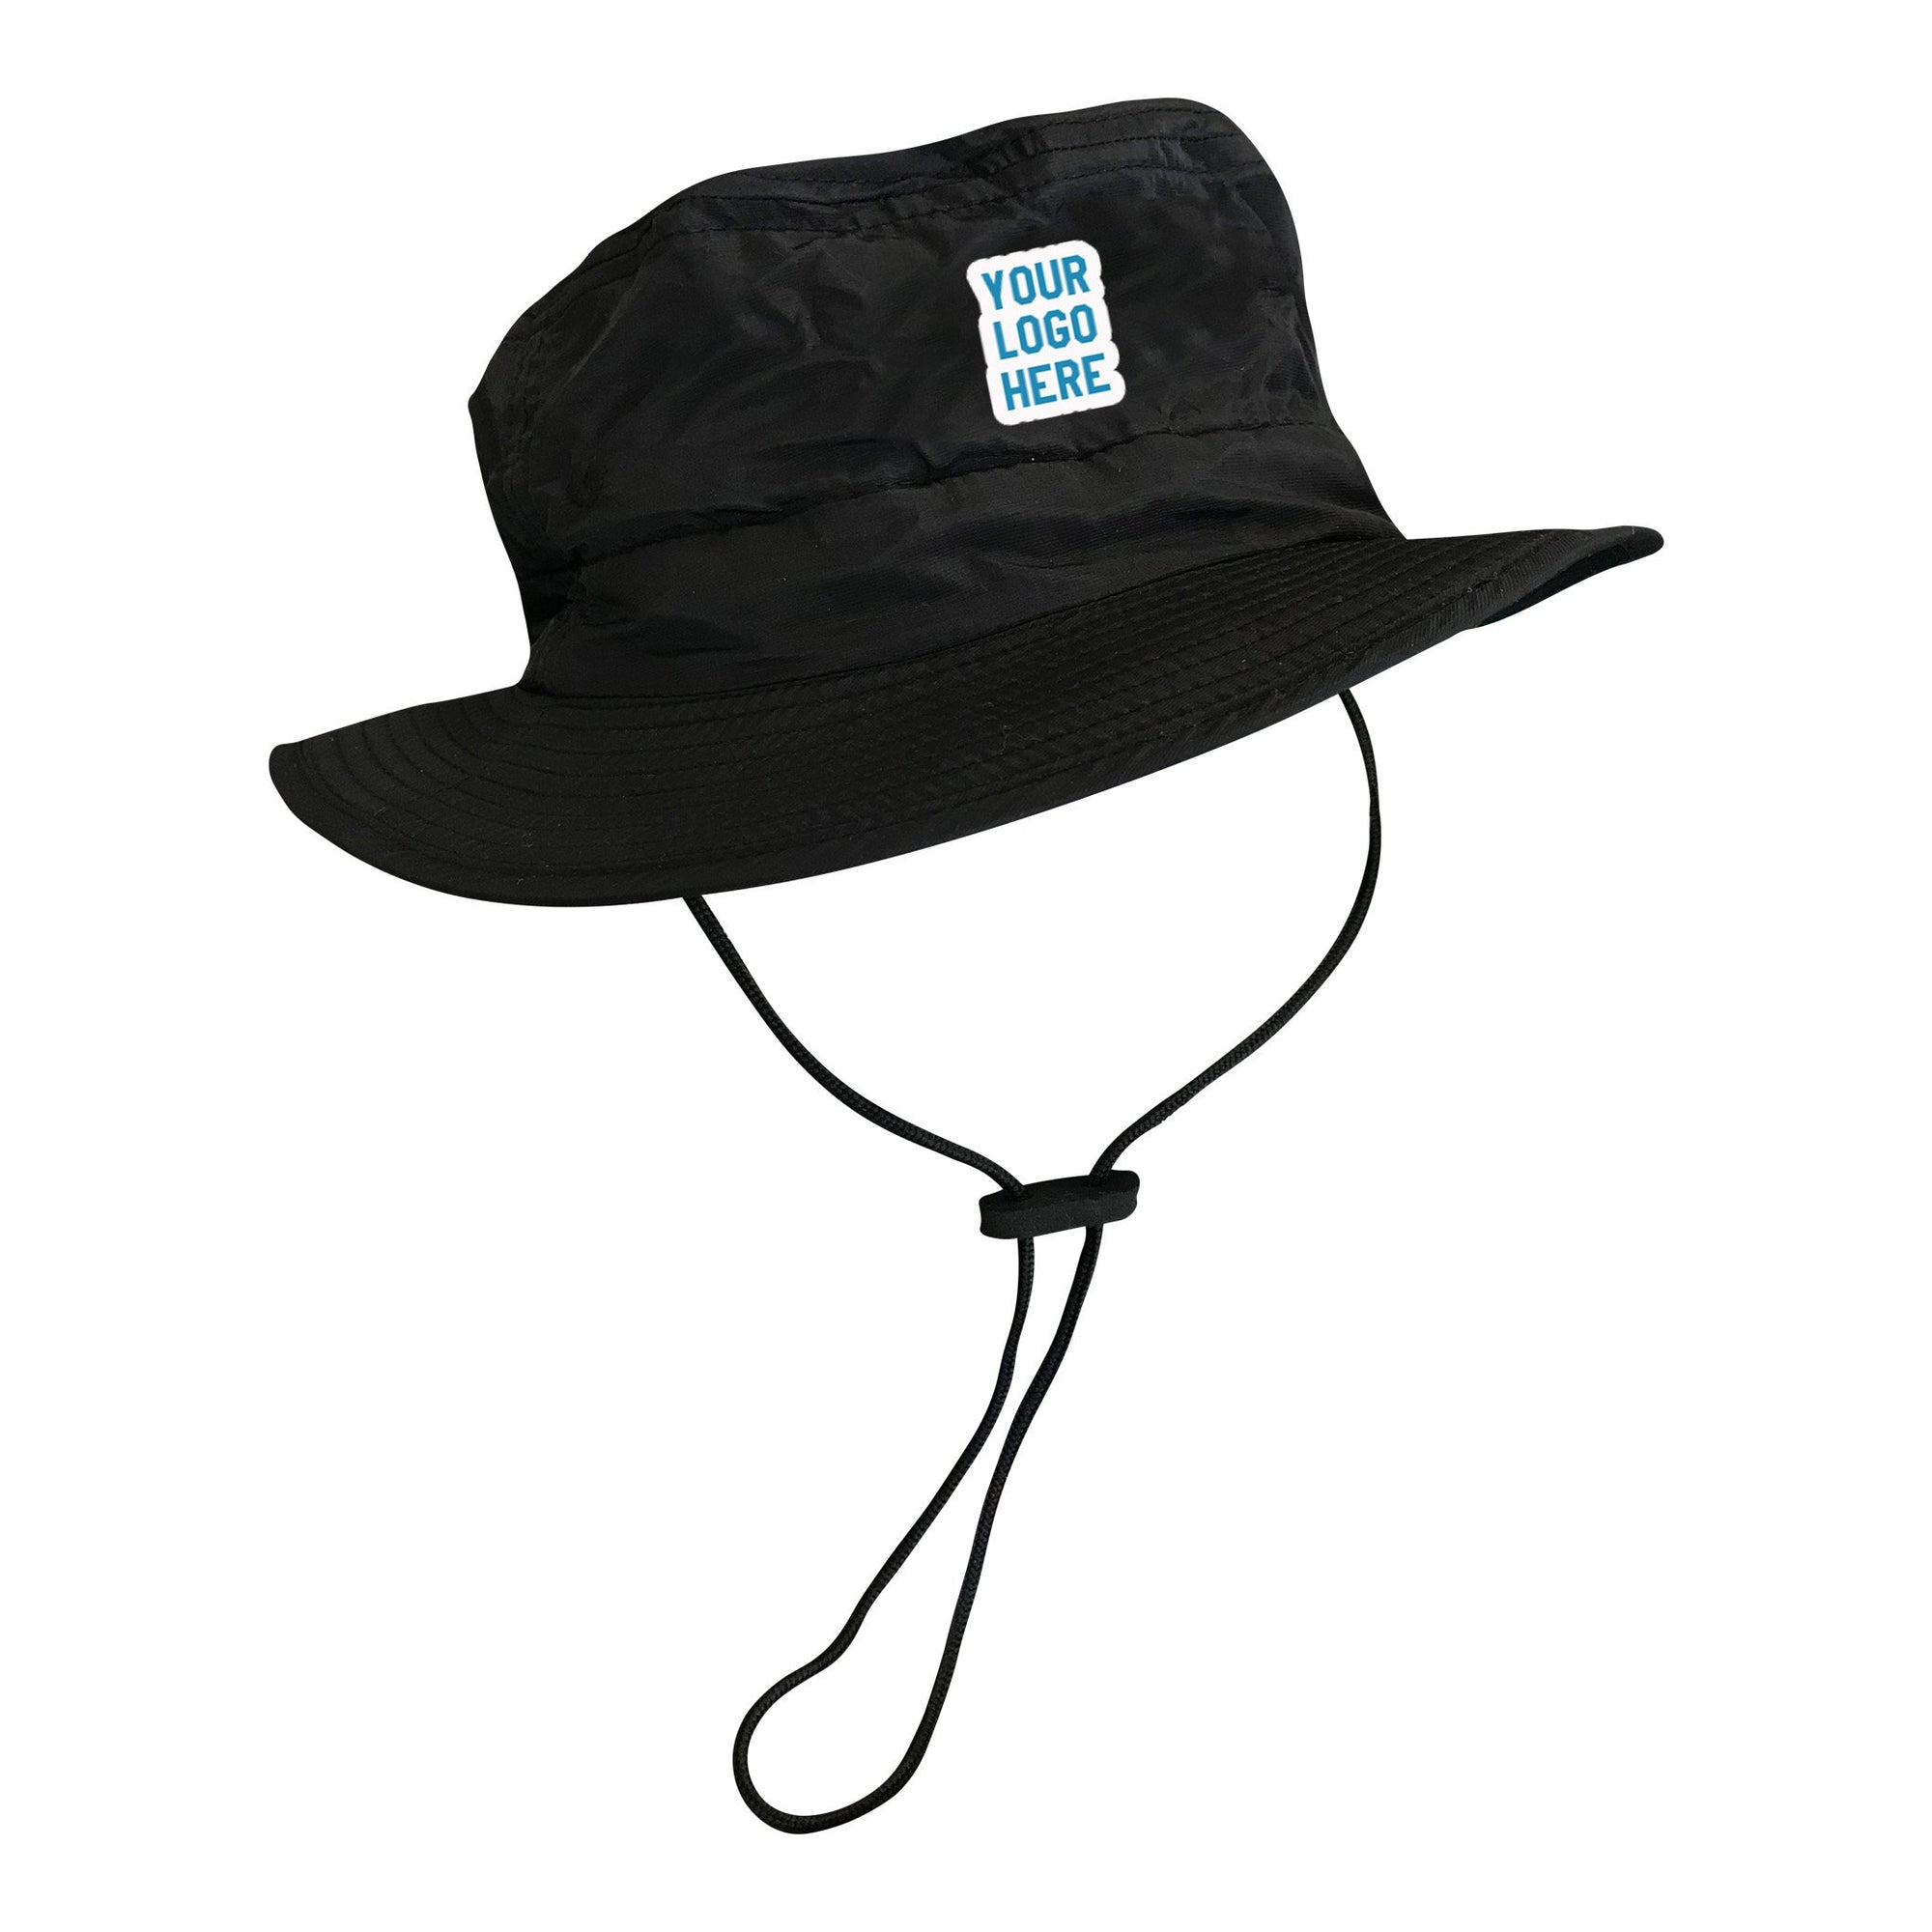 Rugby Imports Adjustable Boonie Hat